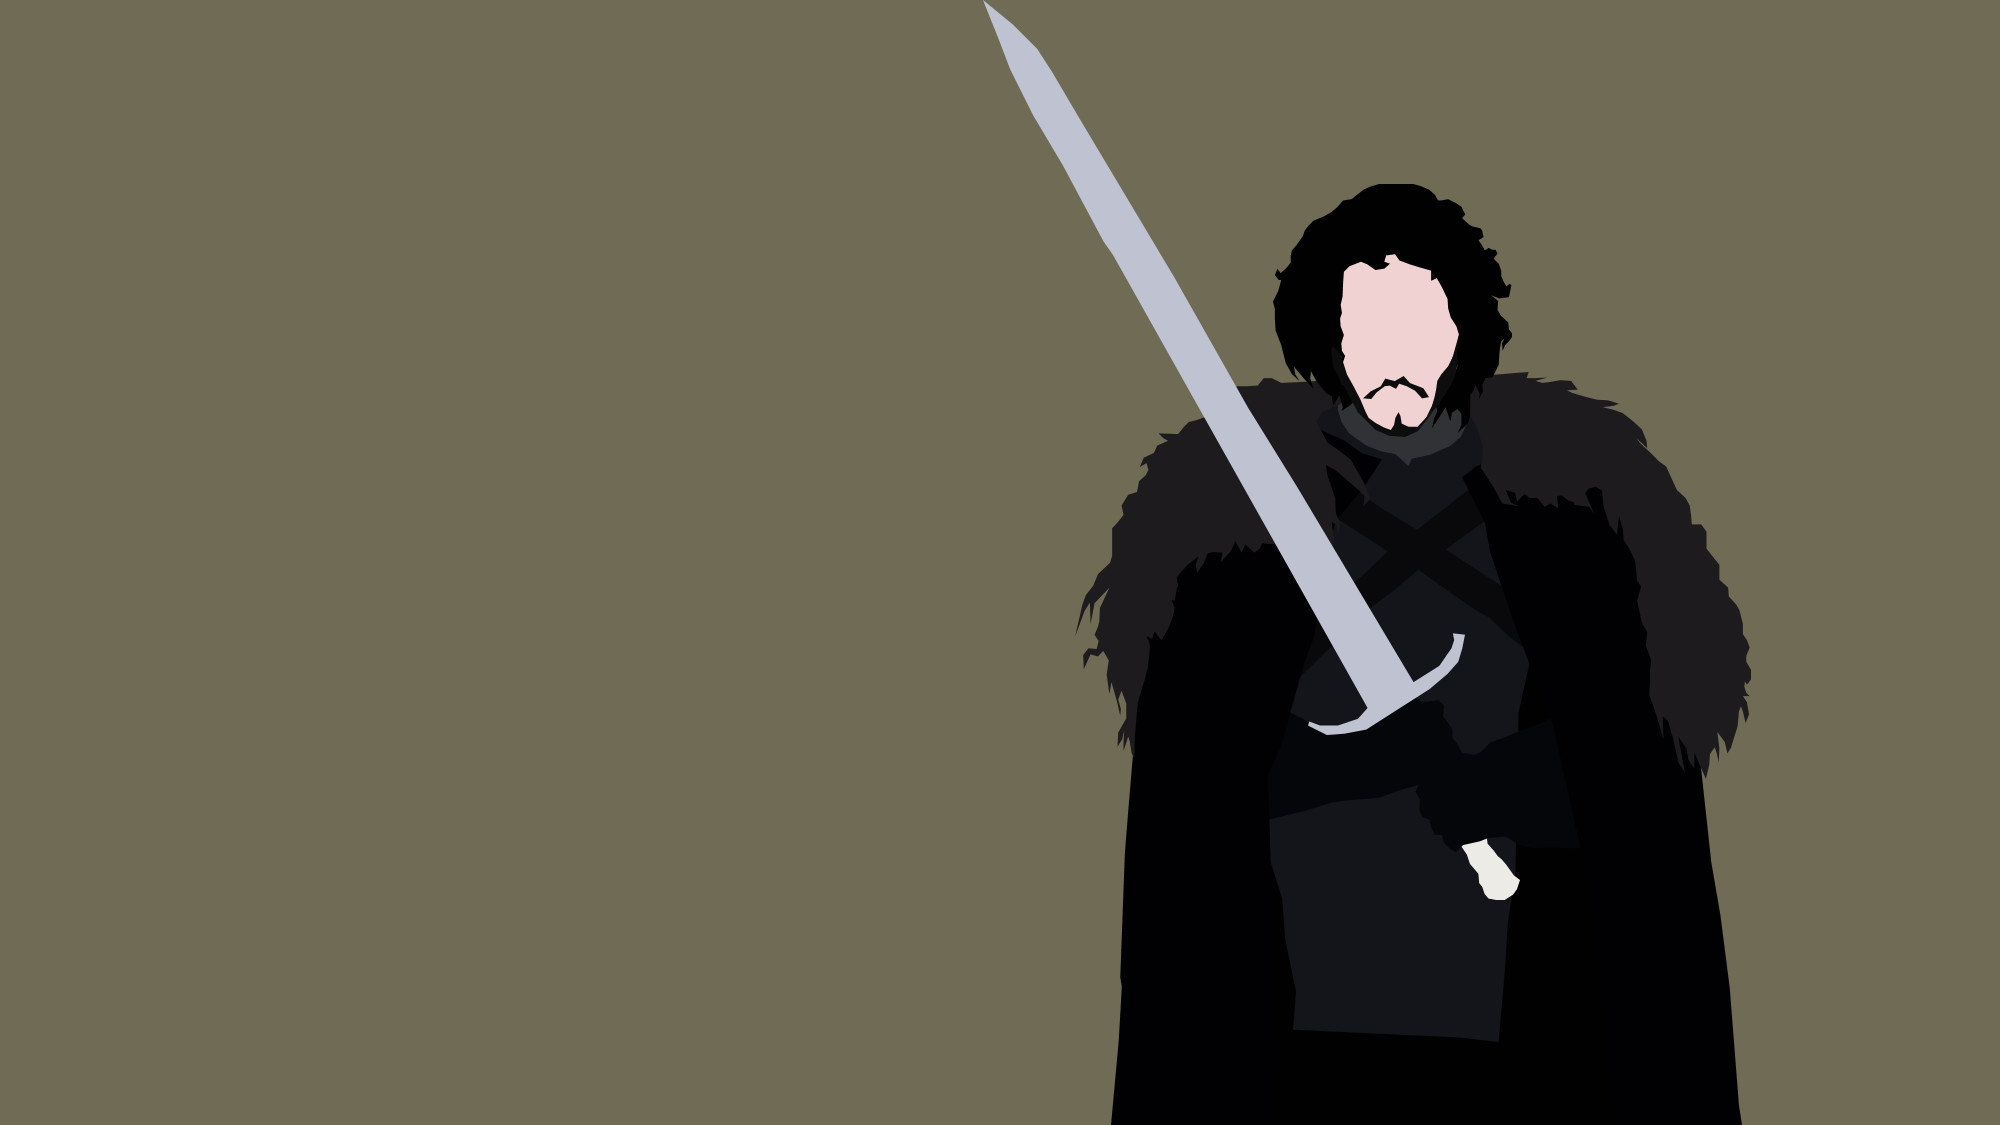 2000x1125 ... Jon Snow from Game of Thrones by Reverendtundra